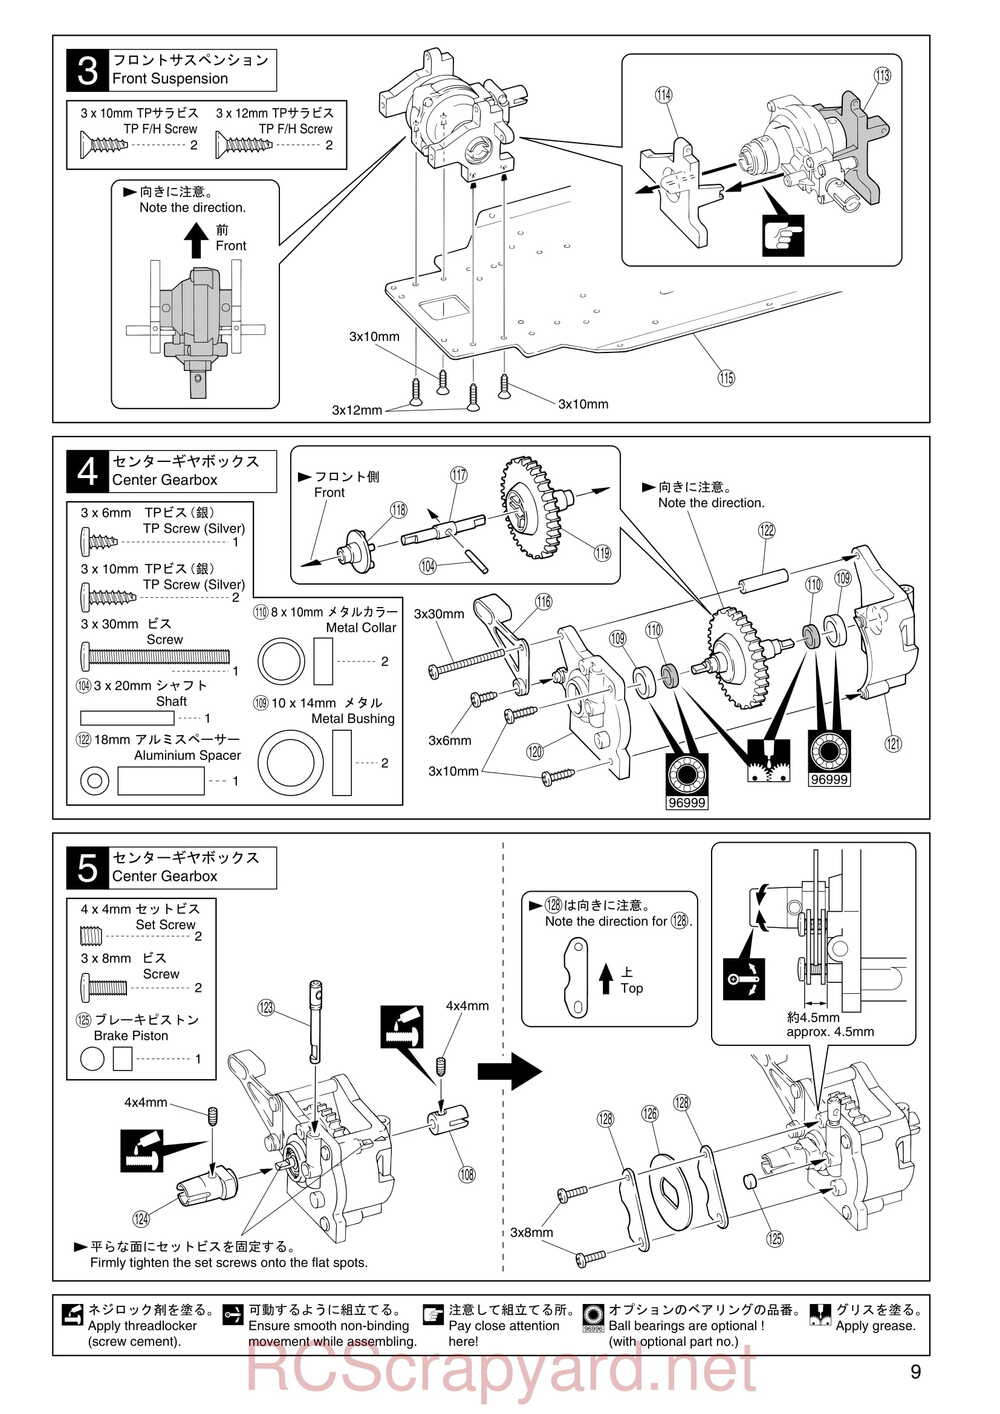 Kyosho - 31061 - TR-15 Rally - Manual - Page 09